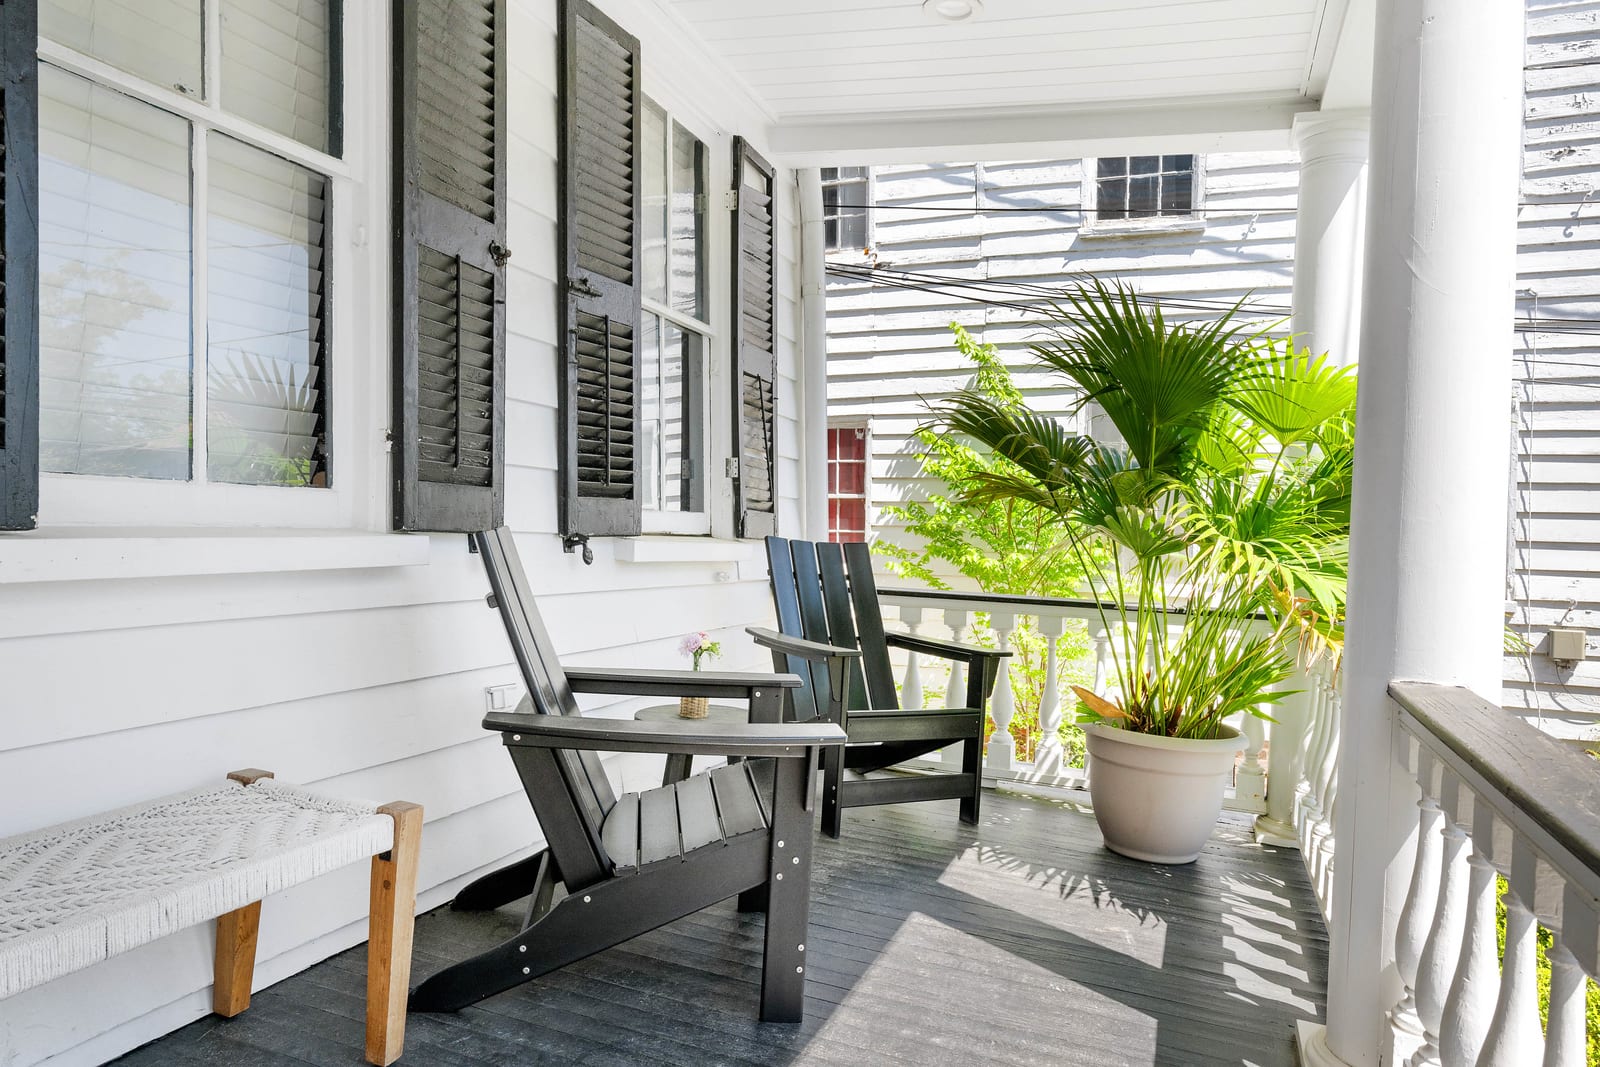 Endless porch space with seating for your group